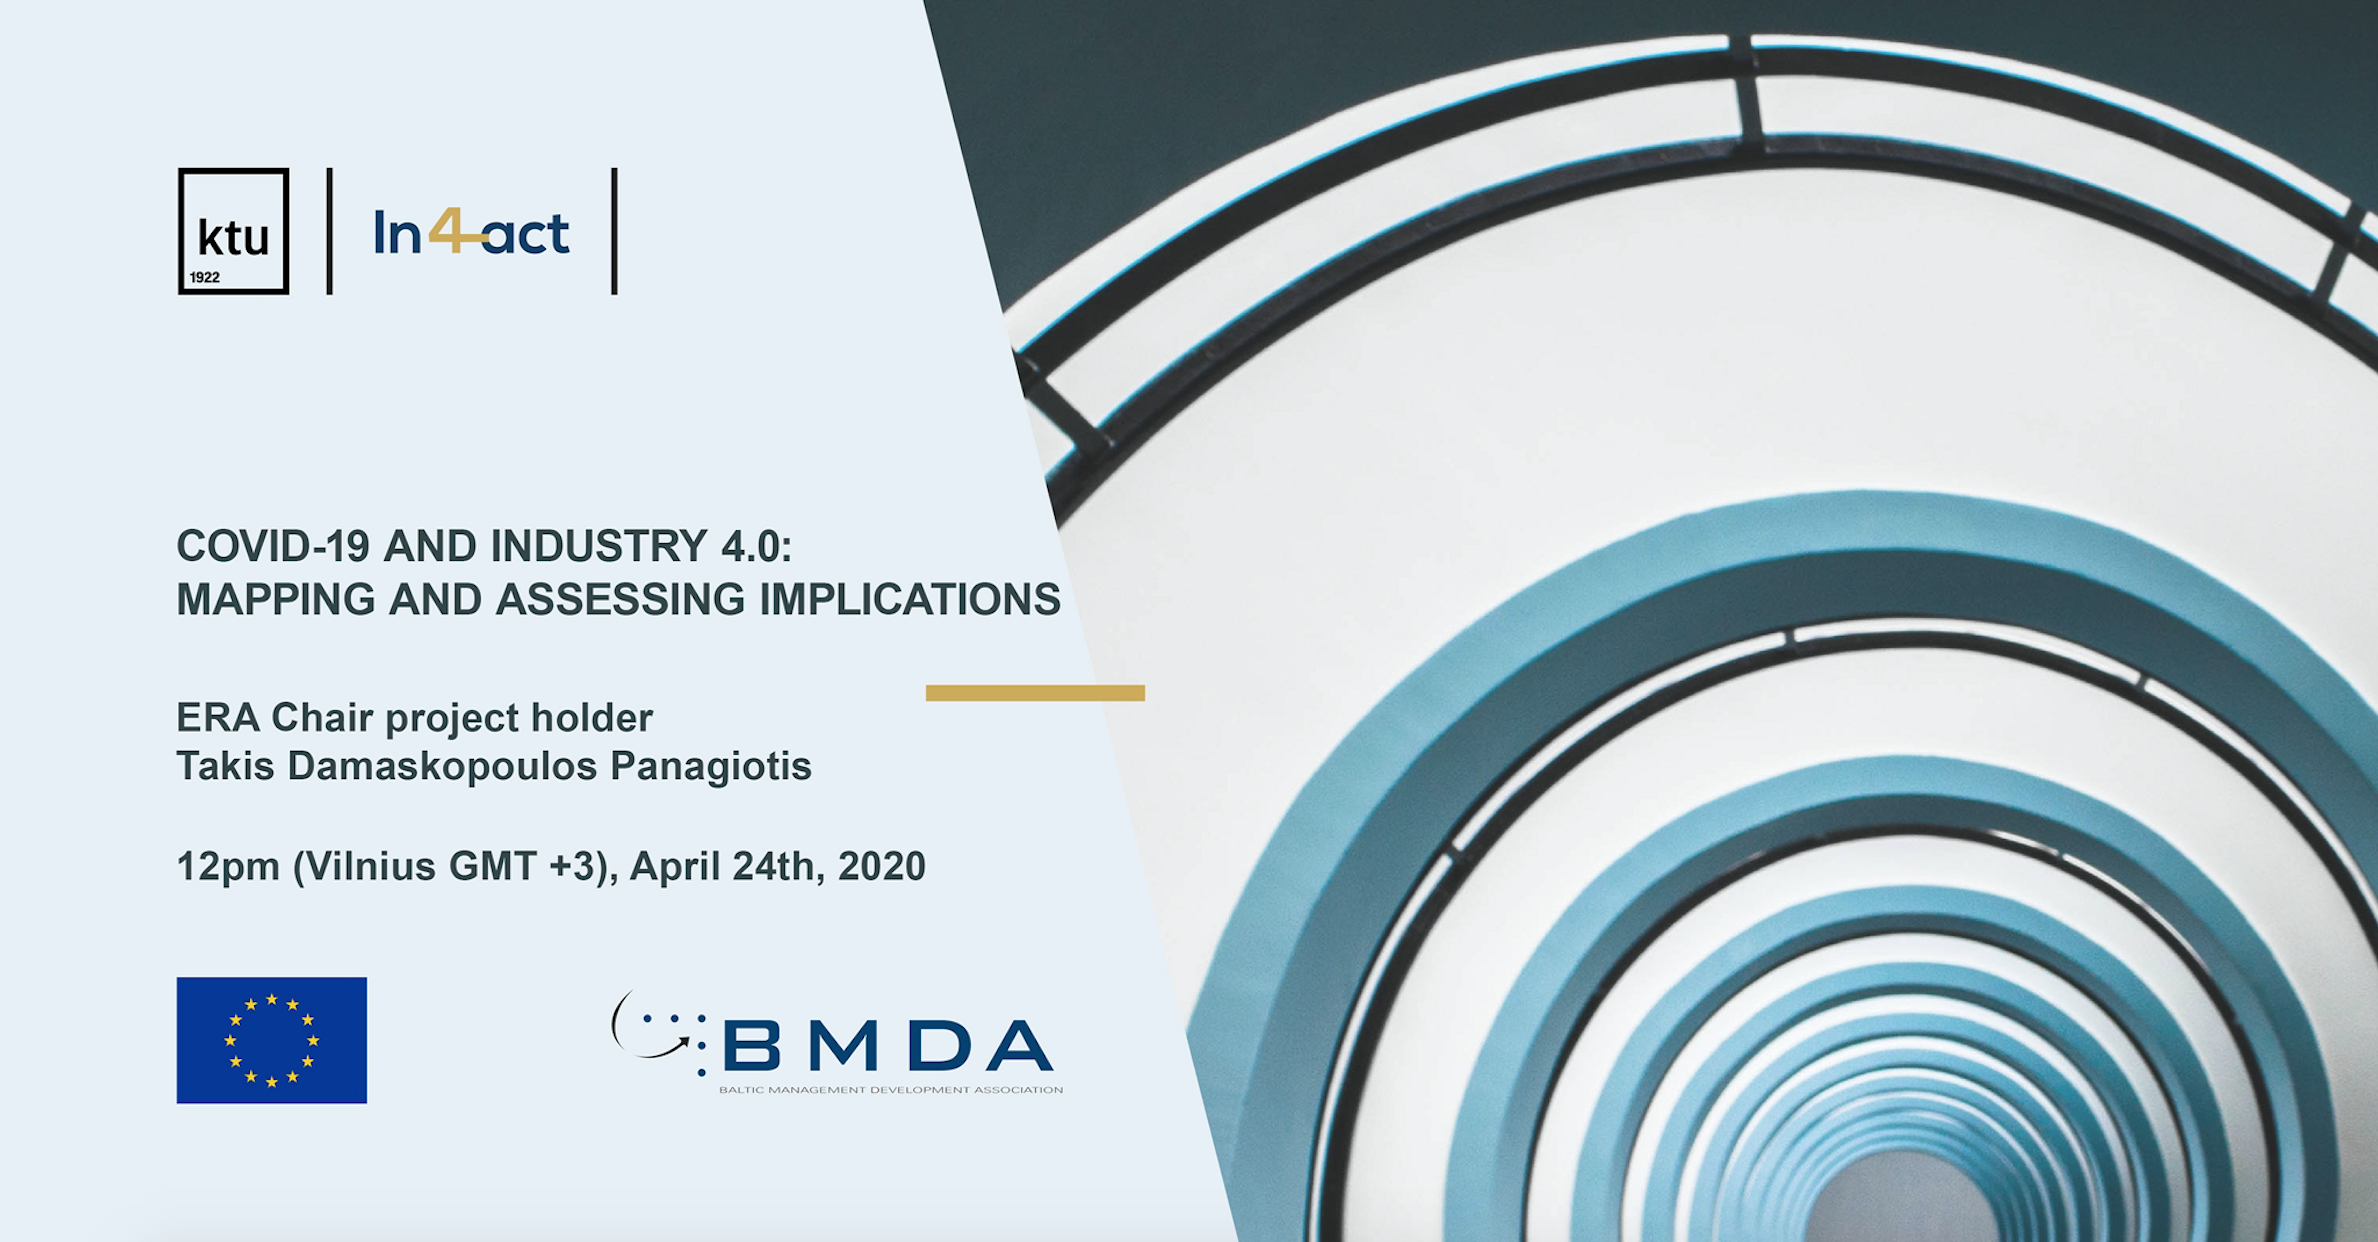  BMDA invites you to webinar “COVID-19 and Industry 4.0: Mapping and Assessing Implications”, 